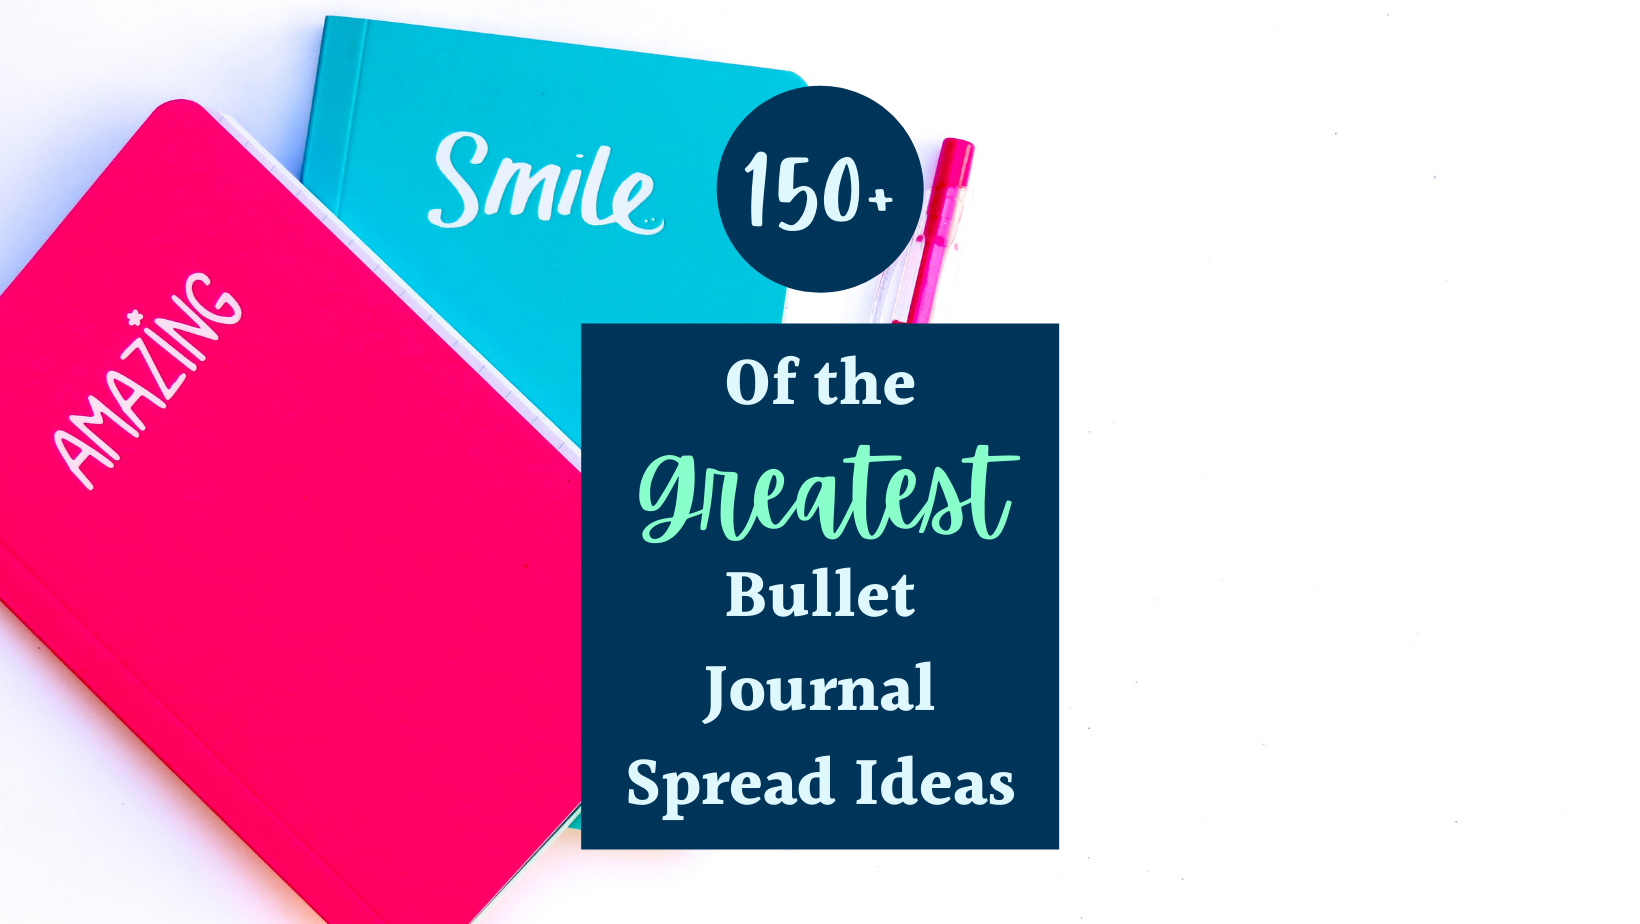 https://thehobbyscheme.com/wp-content/uploads/2021/12/150-of-the-Greatest-Bullet-Journal-Spread-Ideas-Cover.png